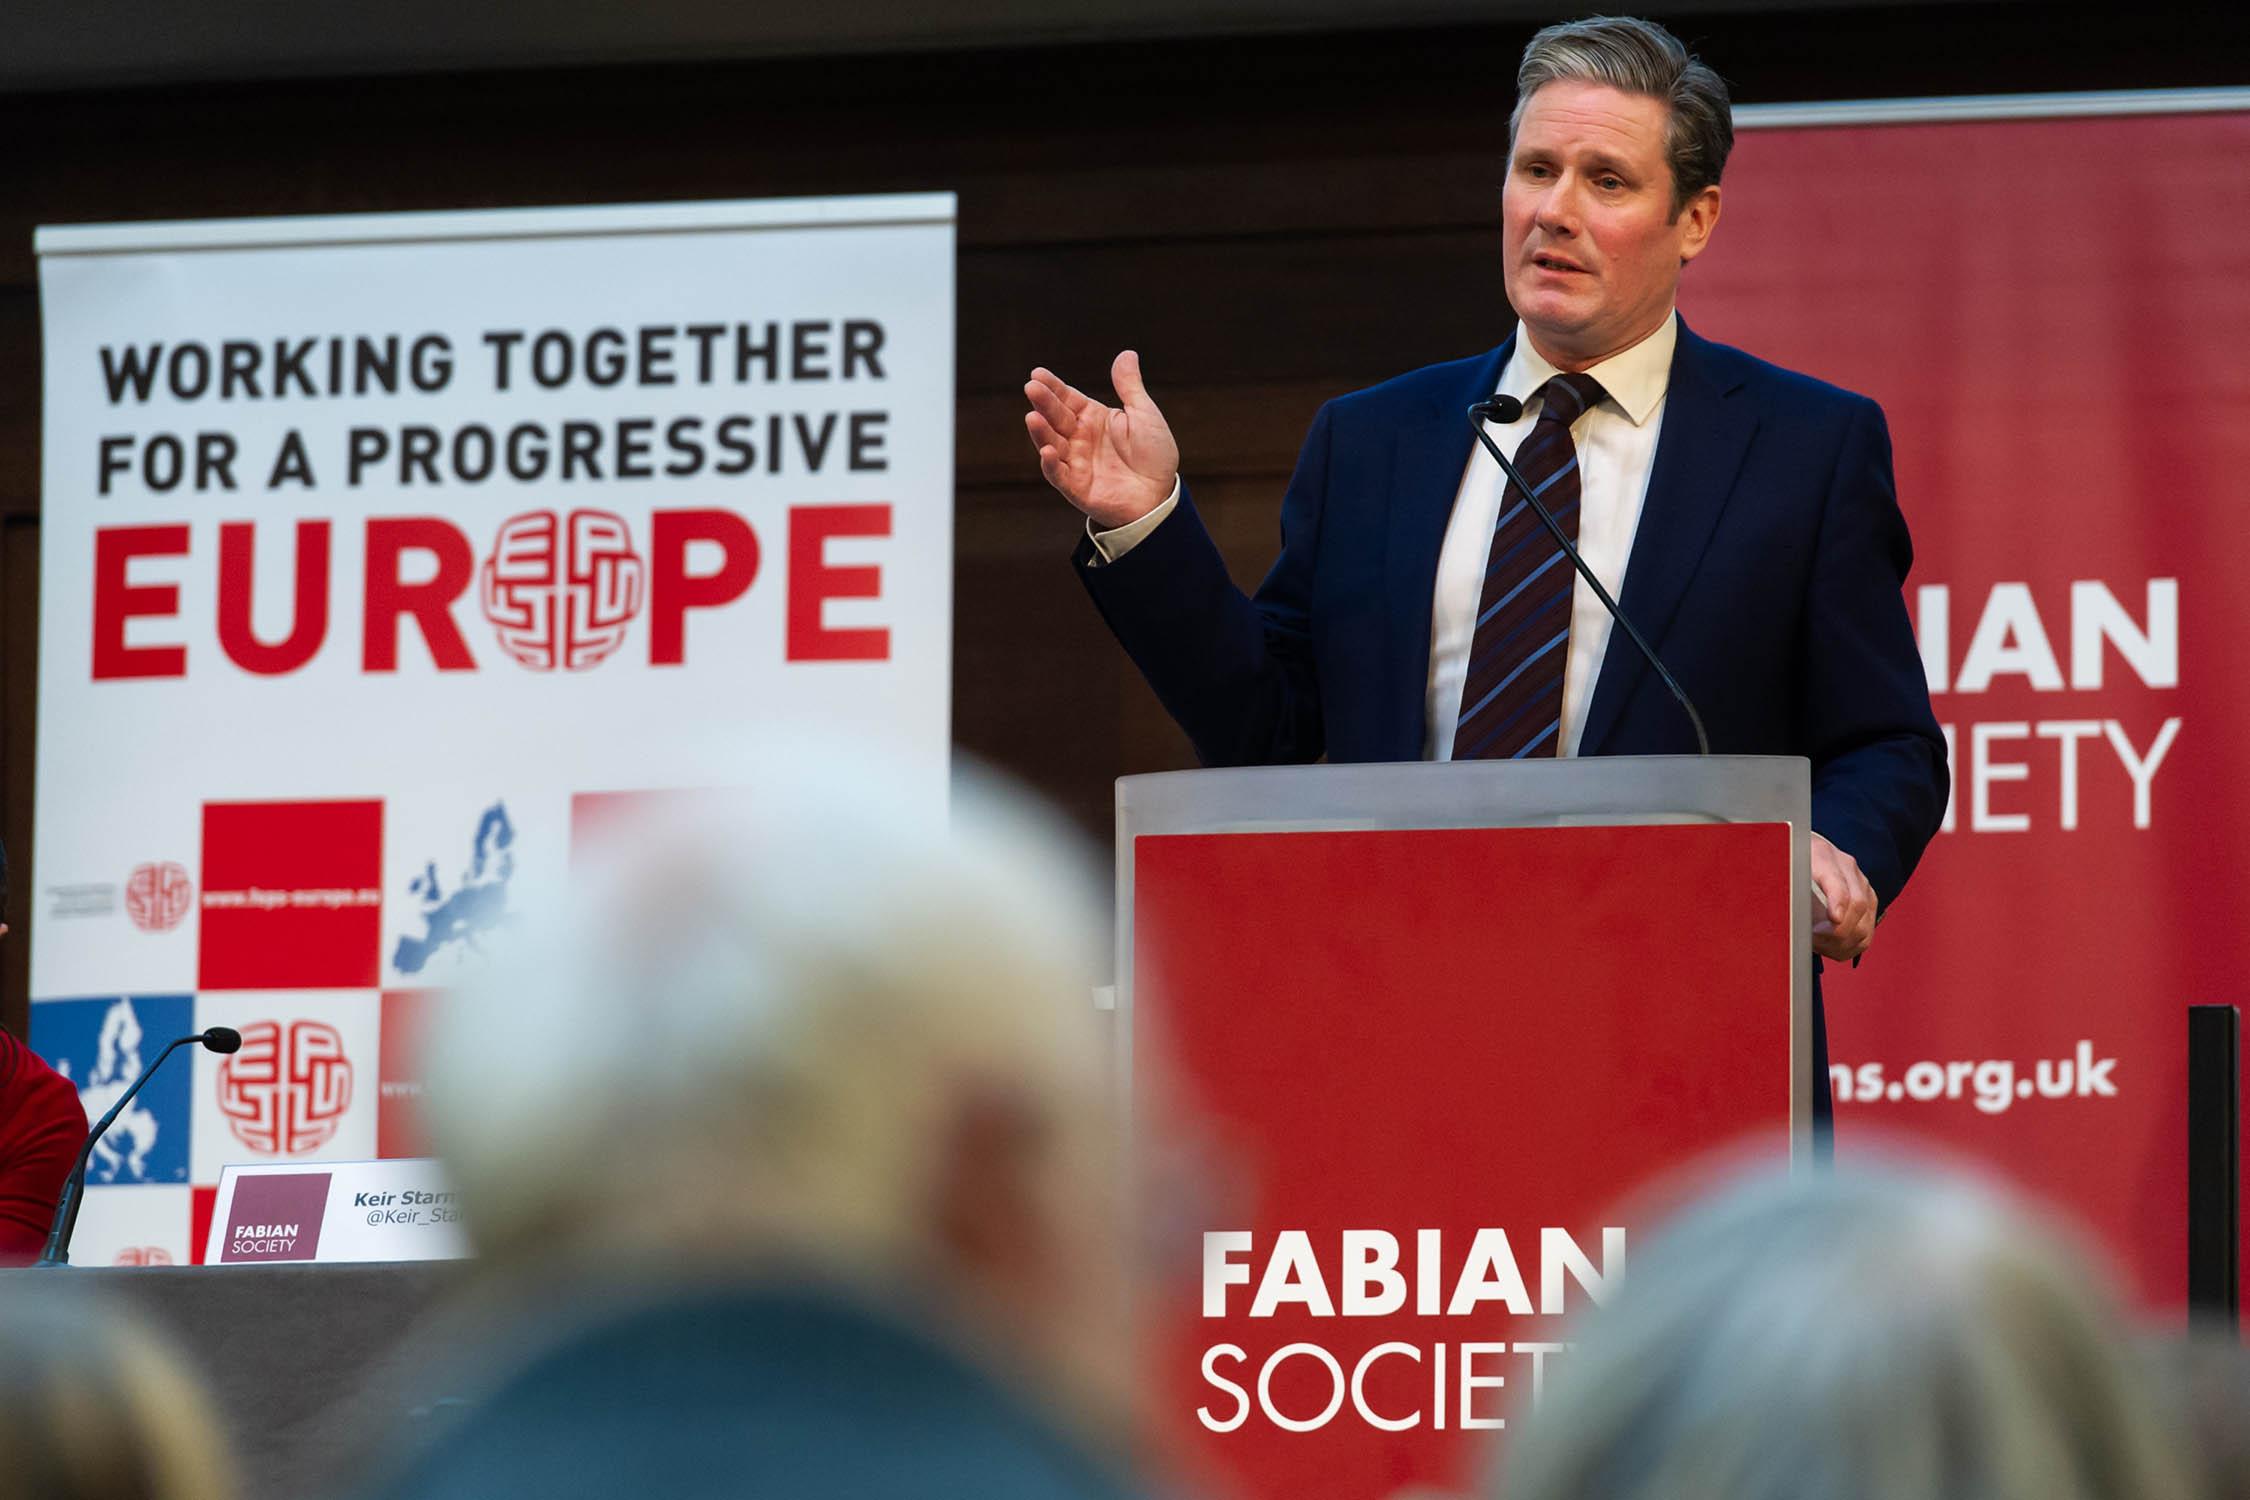 Keir Starmer speaking at the Fabian Society about a progressive Europe